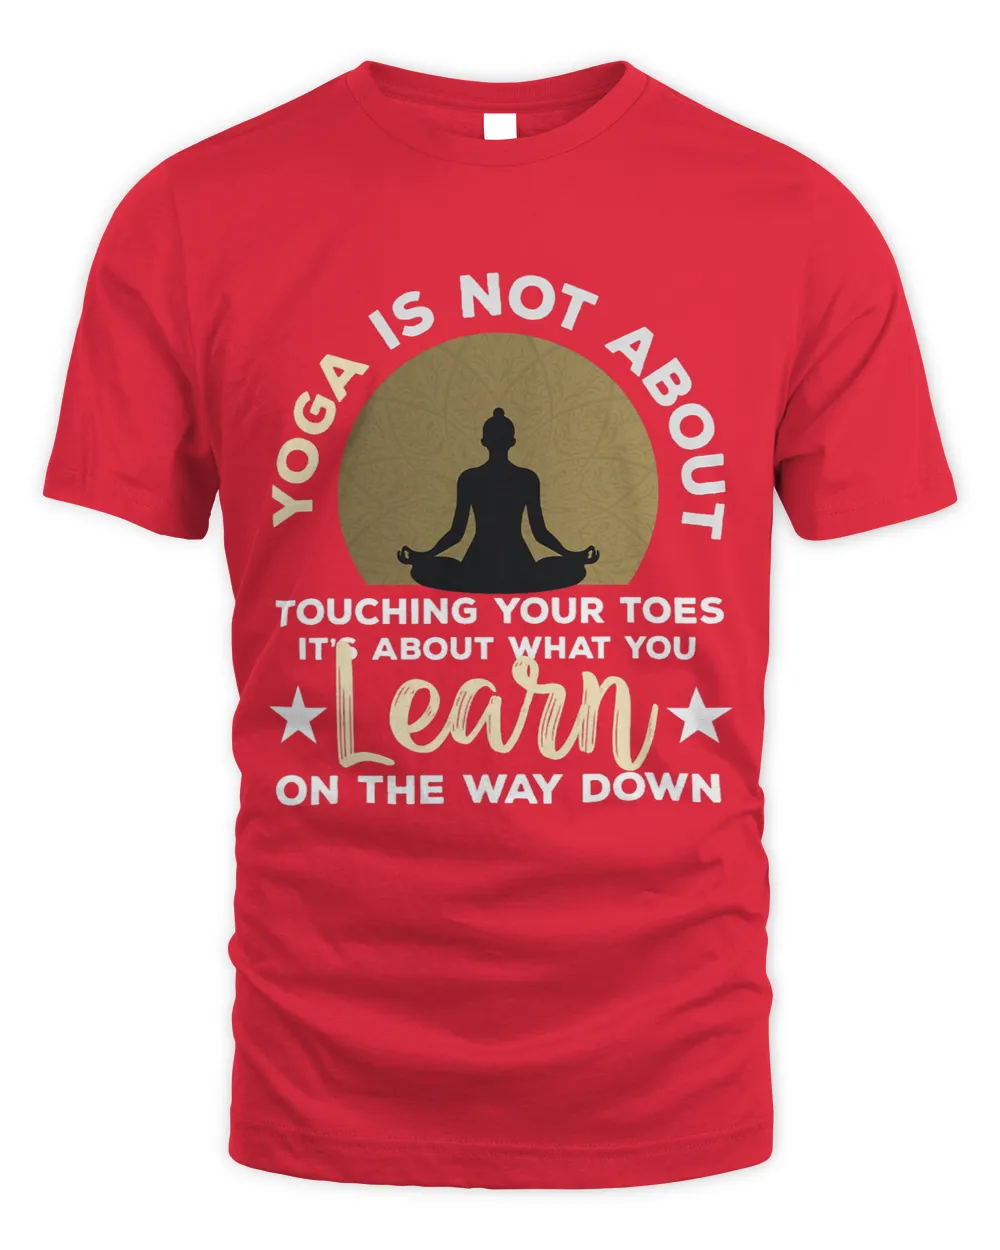 Yoga Meditation Yoga is not about touching your toes 1